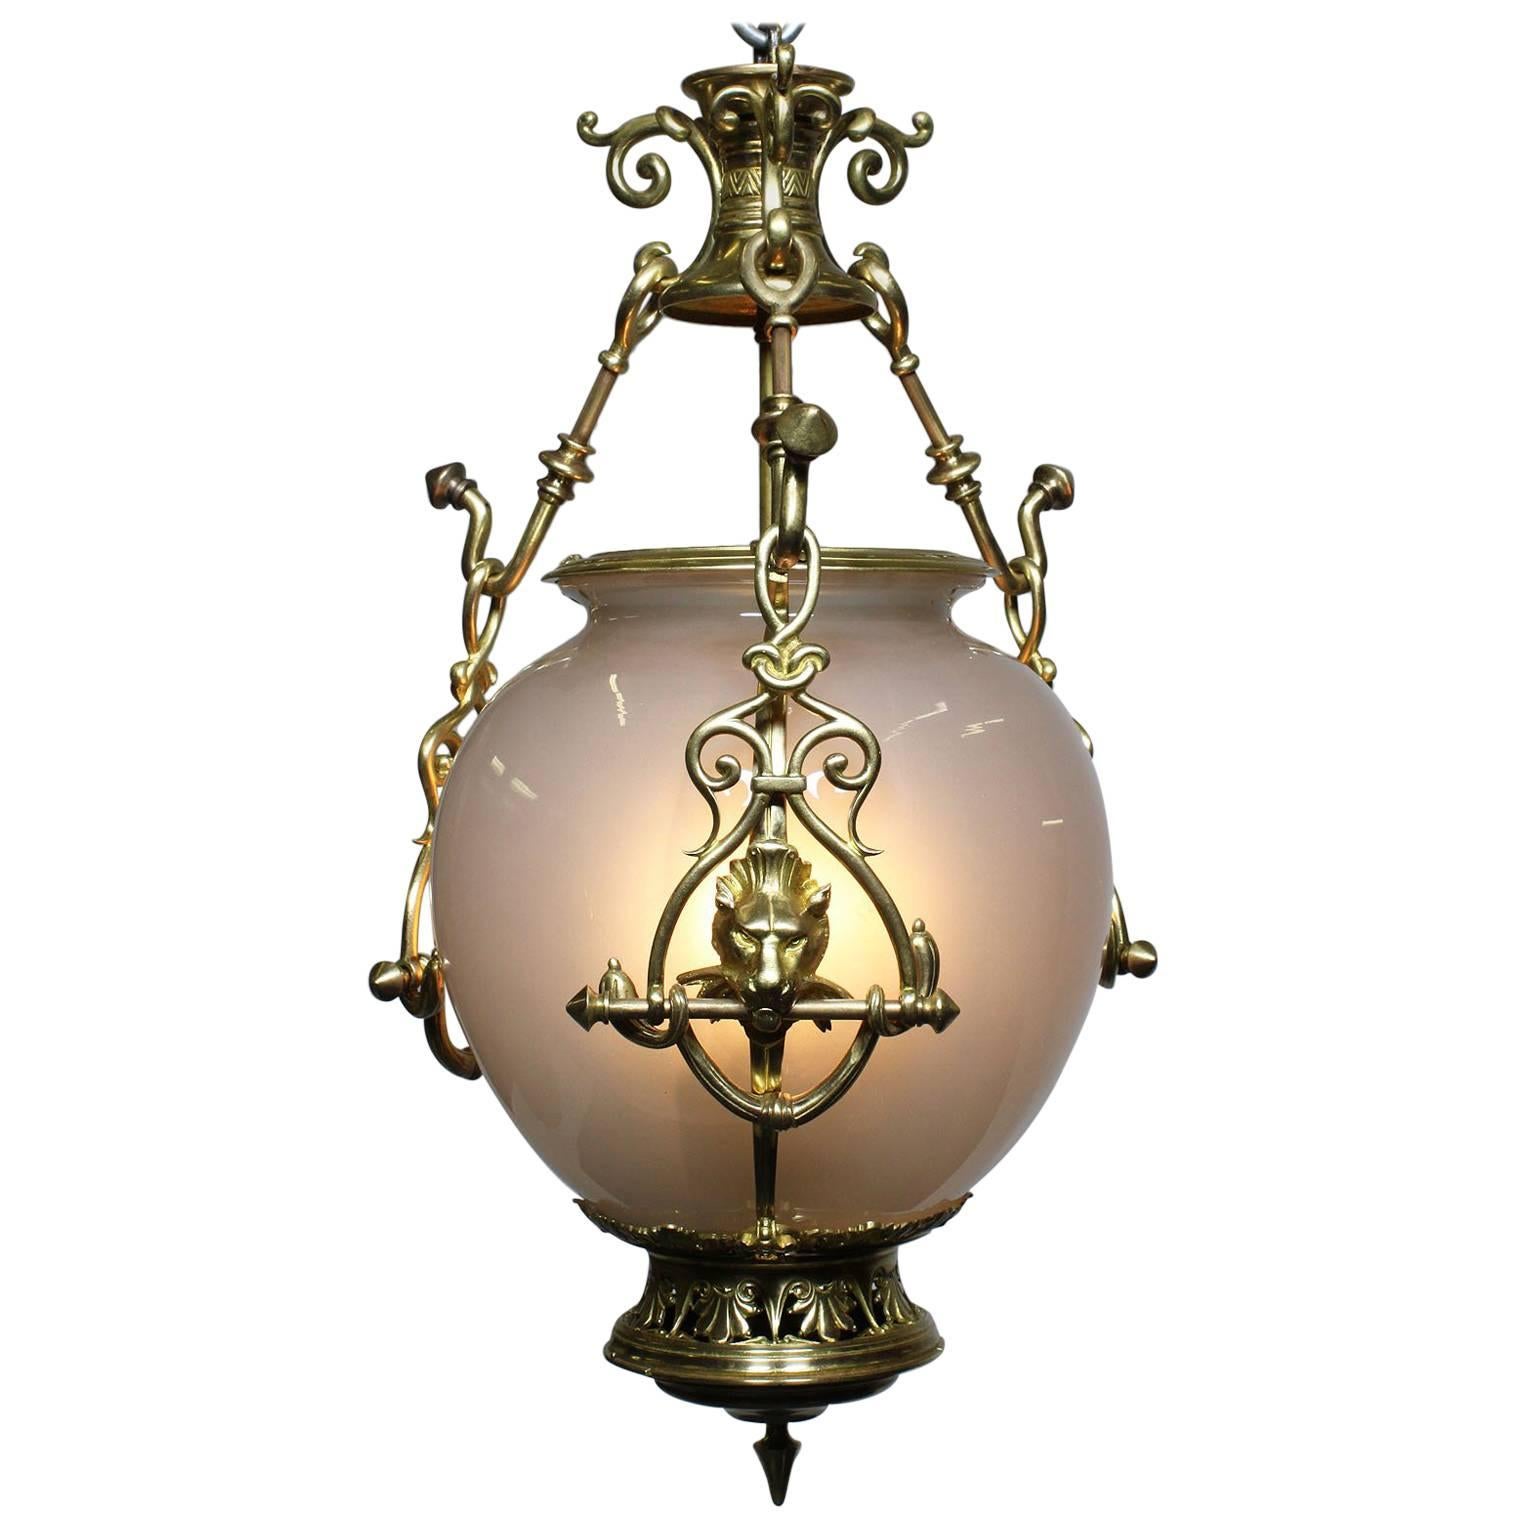 Early 20th Century Gilt-Bronze and Opaline Glass Hanging Lantern with Lion Pelts